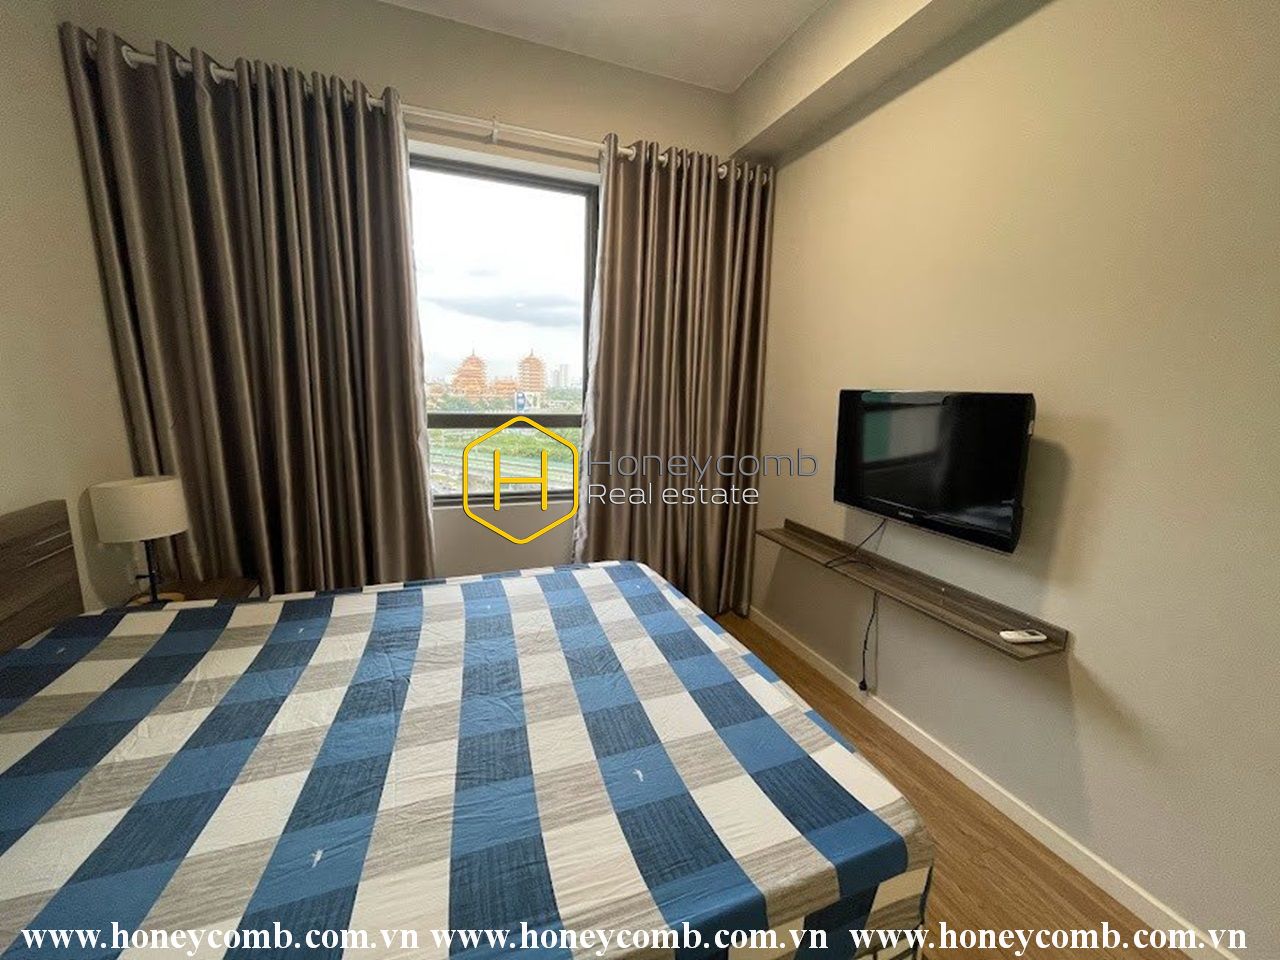 The new 2 bedrooms-apartment for lease in Masteri An Phu – Honeycomb